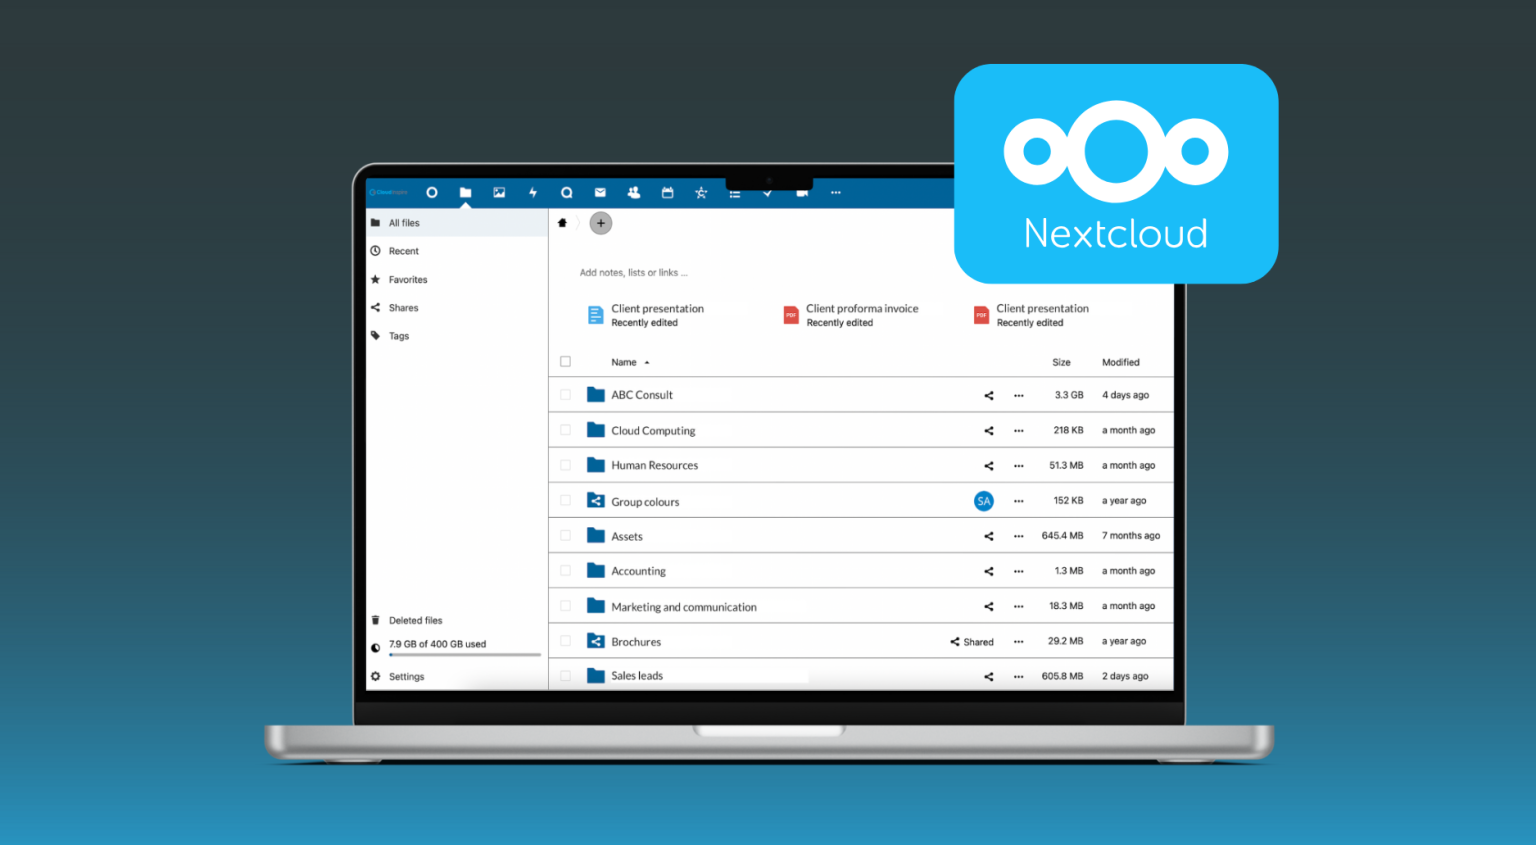 Nextcloud - ideal drive for small business at Cloud Inspire shop